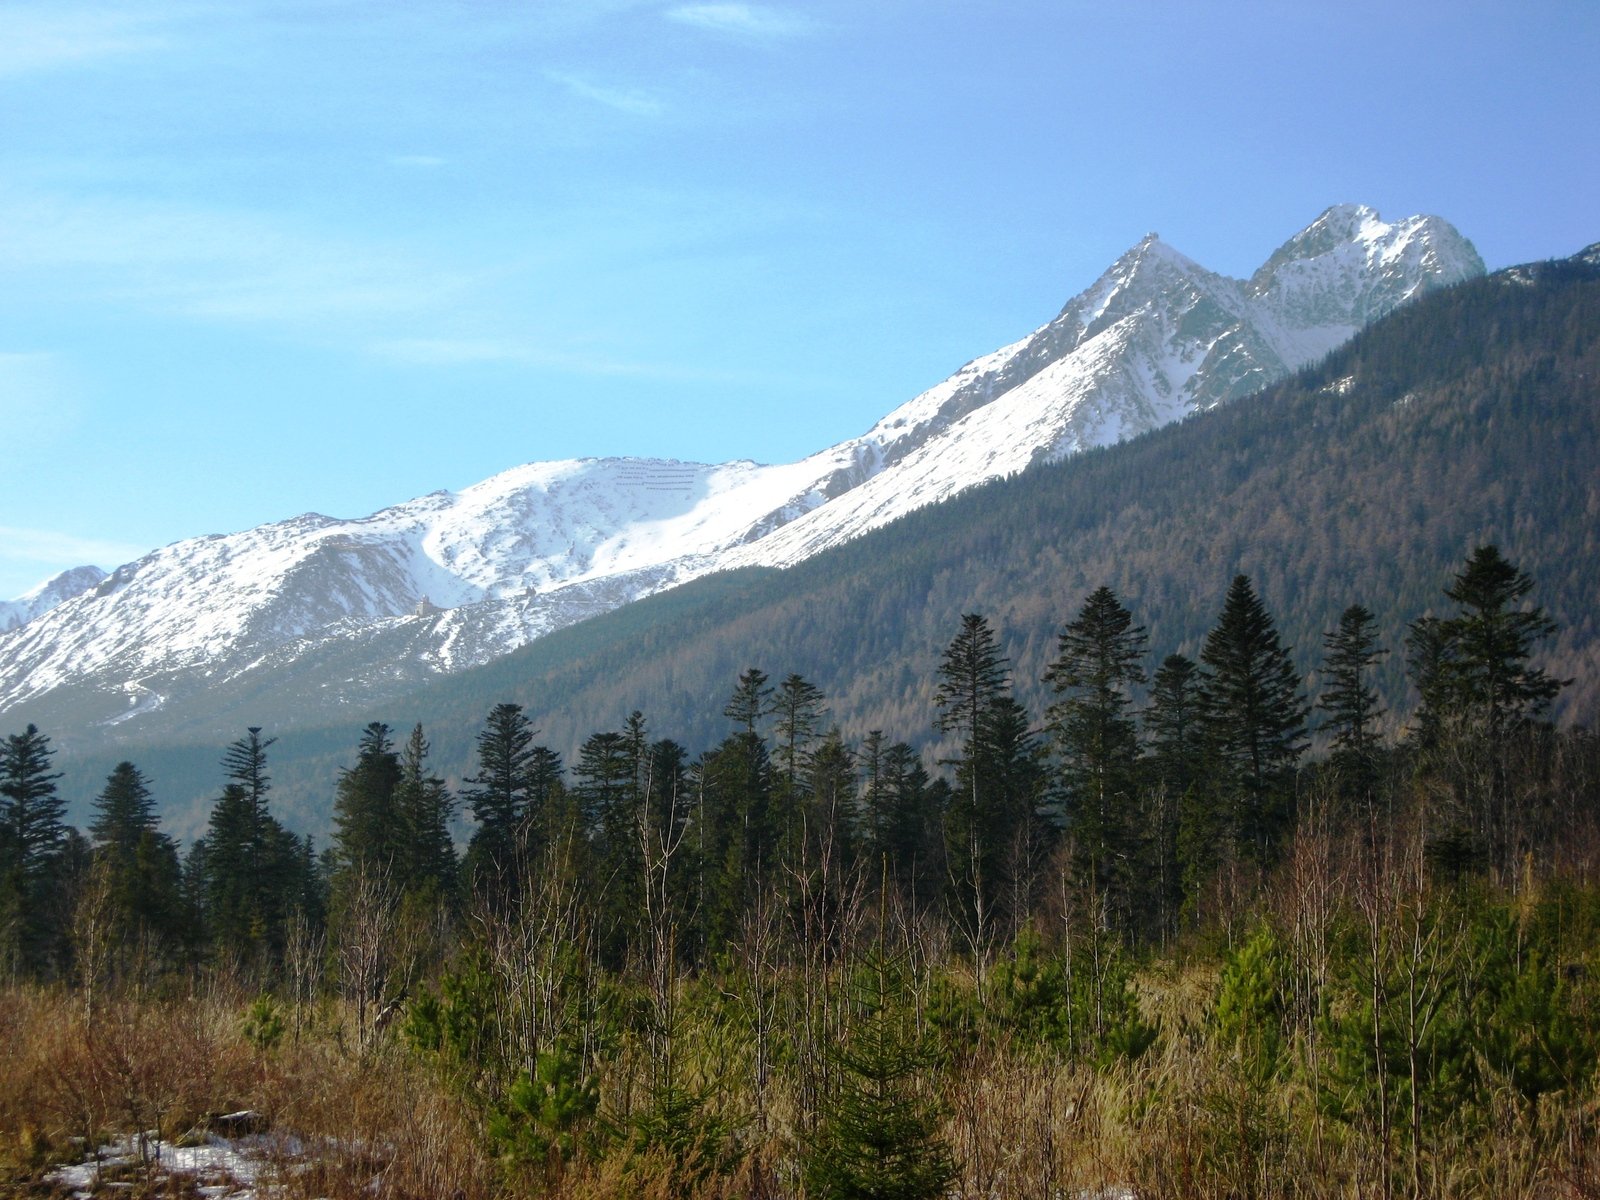 the mountains are covered with snow and trees